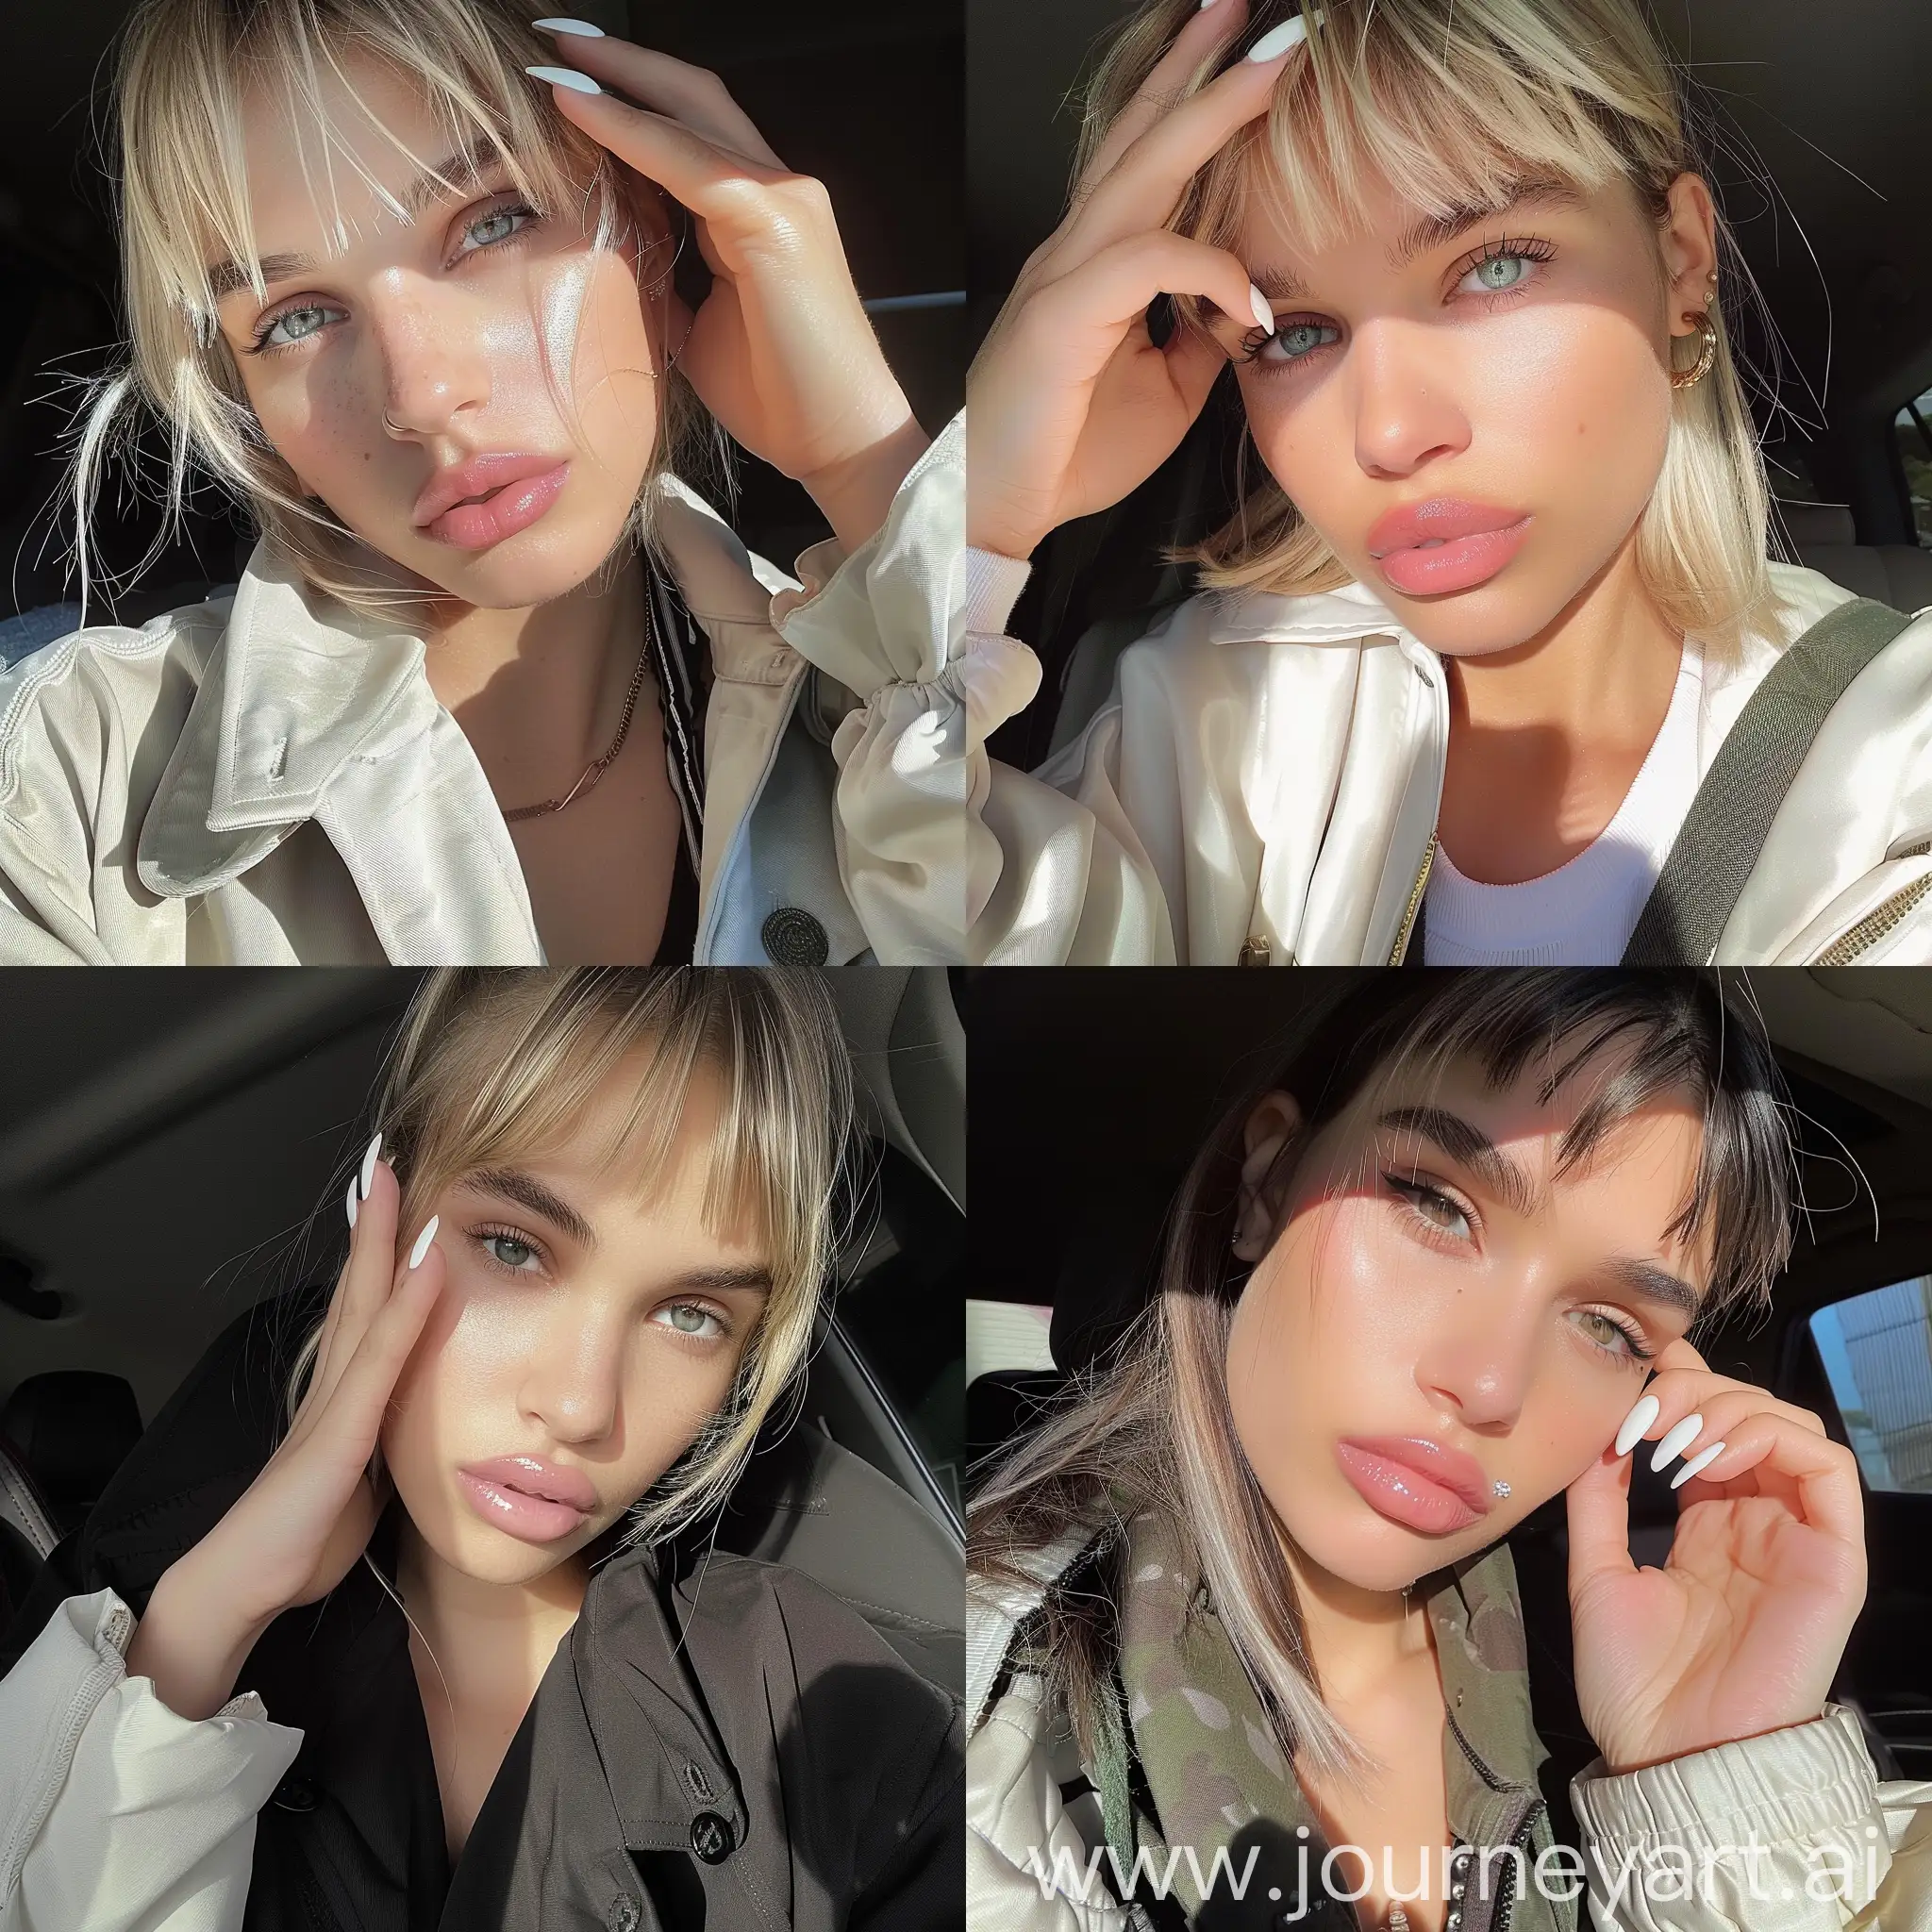 Fashionable-Super-Model-Girl-with-Bangs-and-White-Gel-Nail-Polish